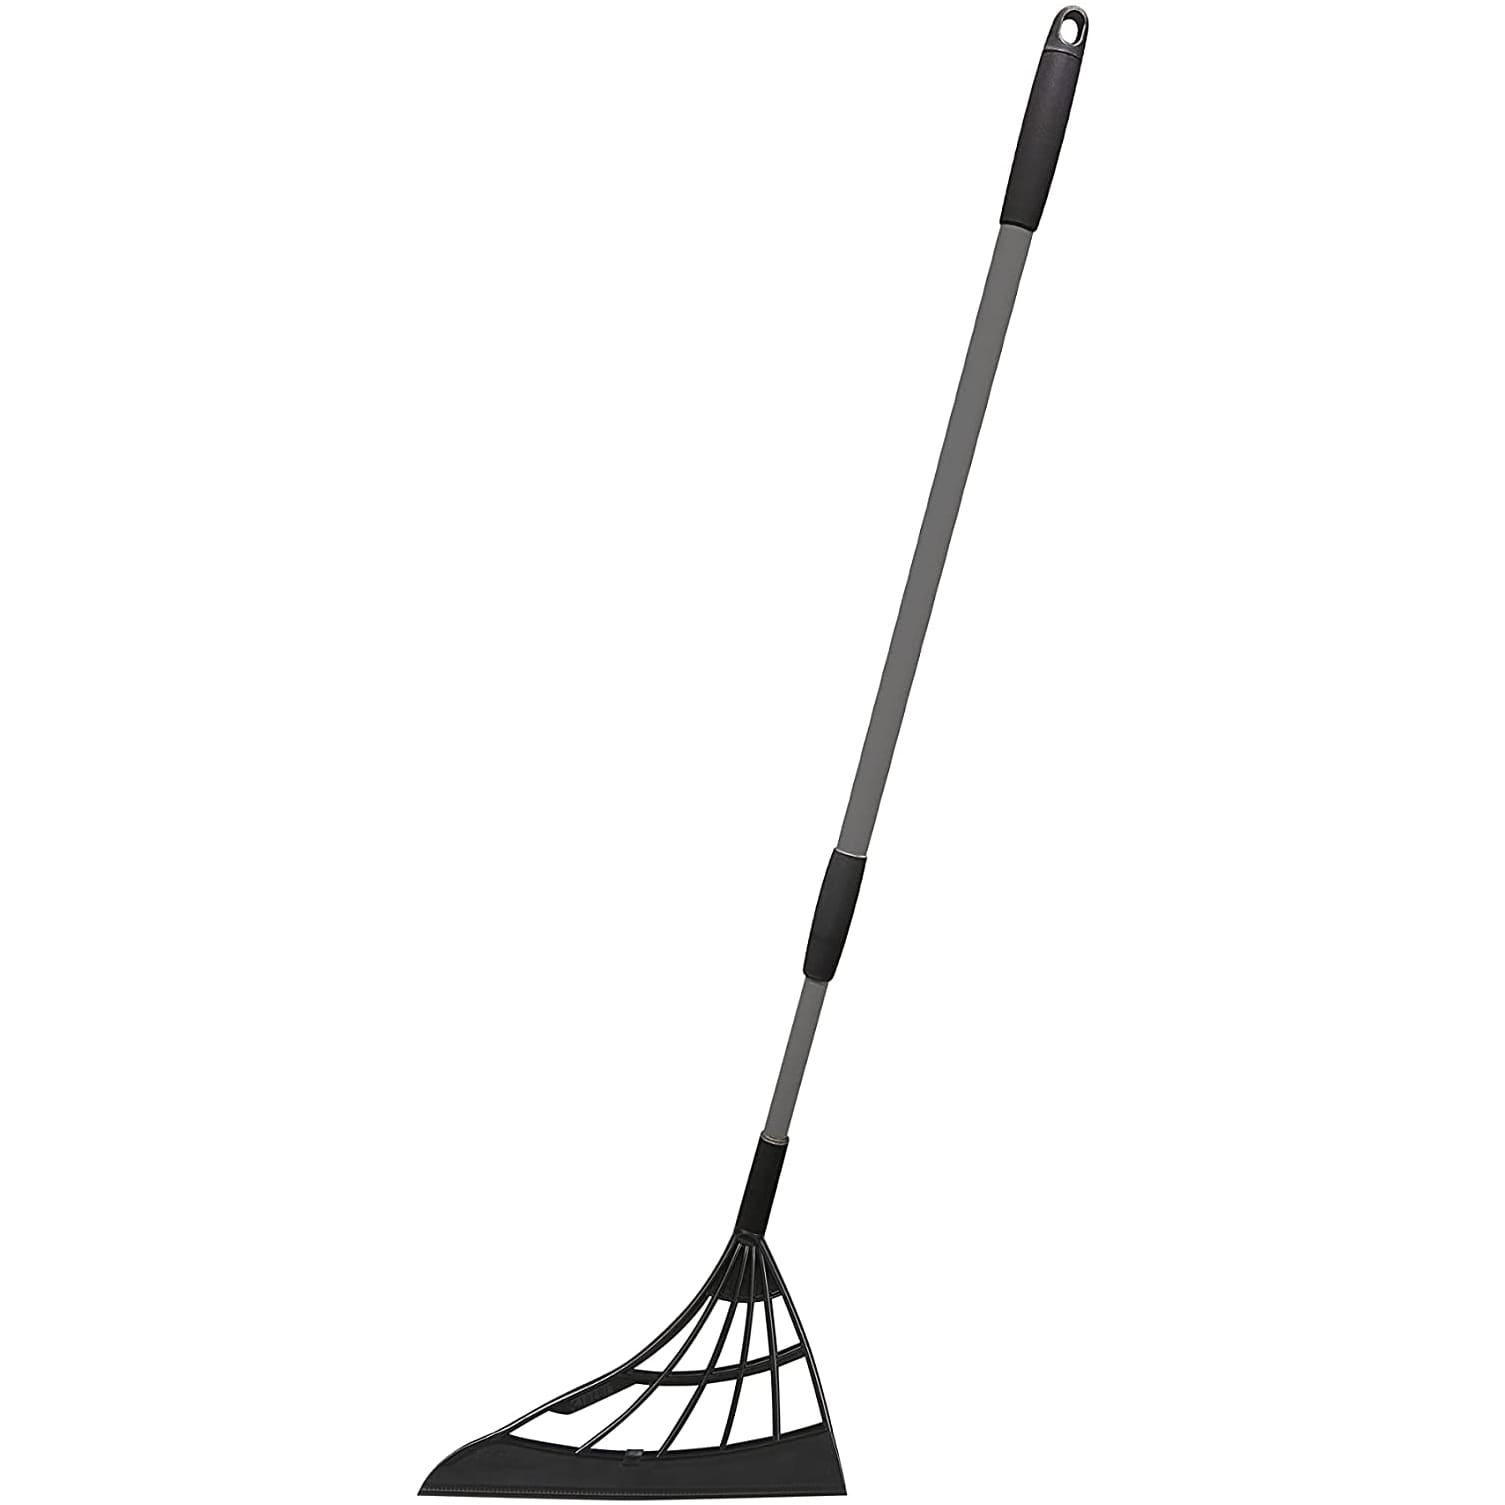 Broombi Broom Review: This Broom Cleans Your Floor Like a Squeegee